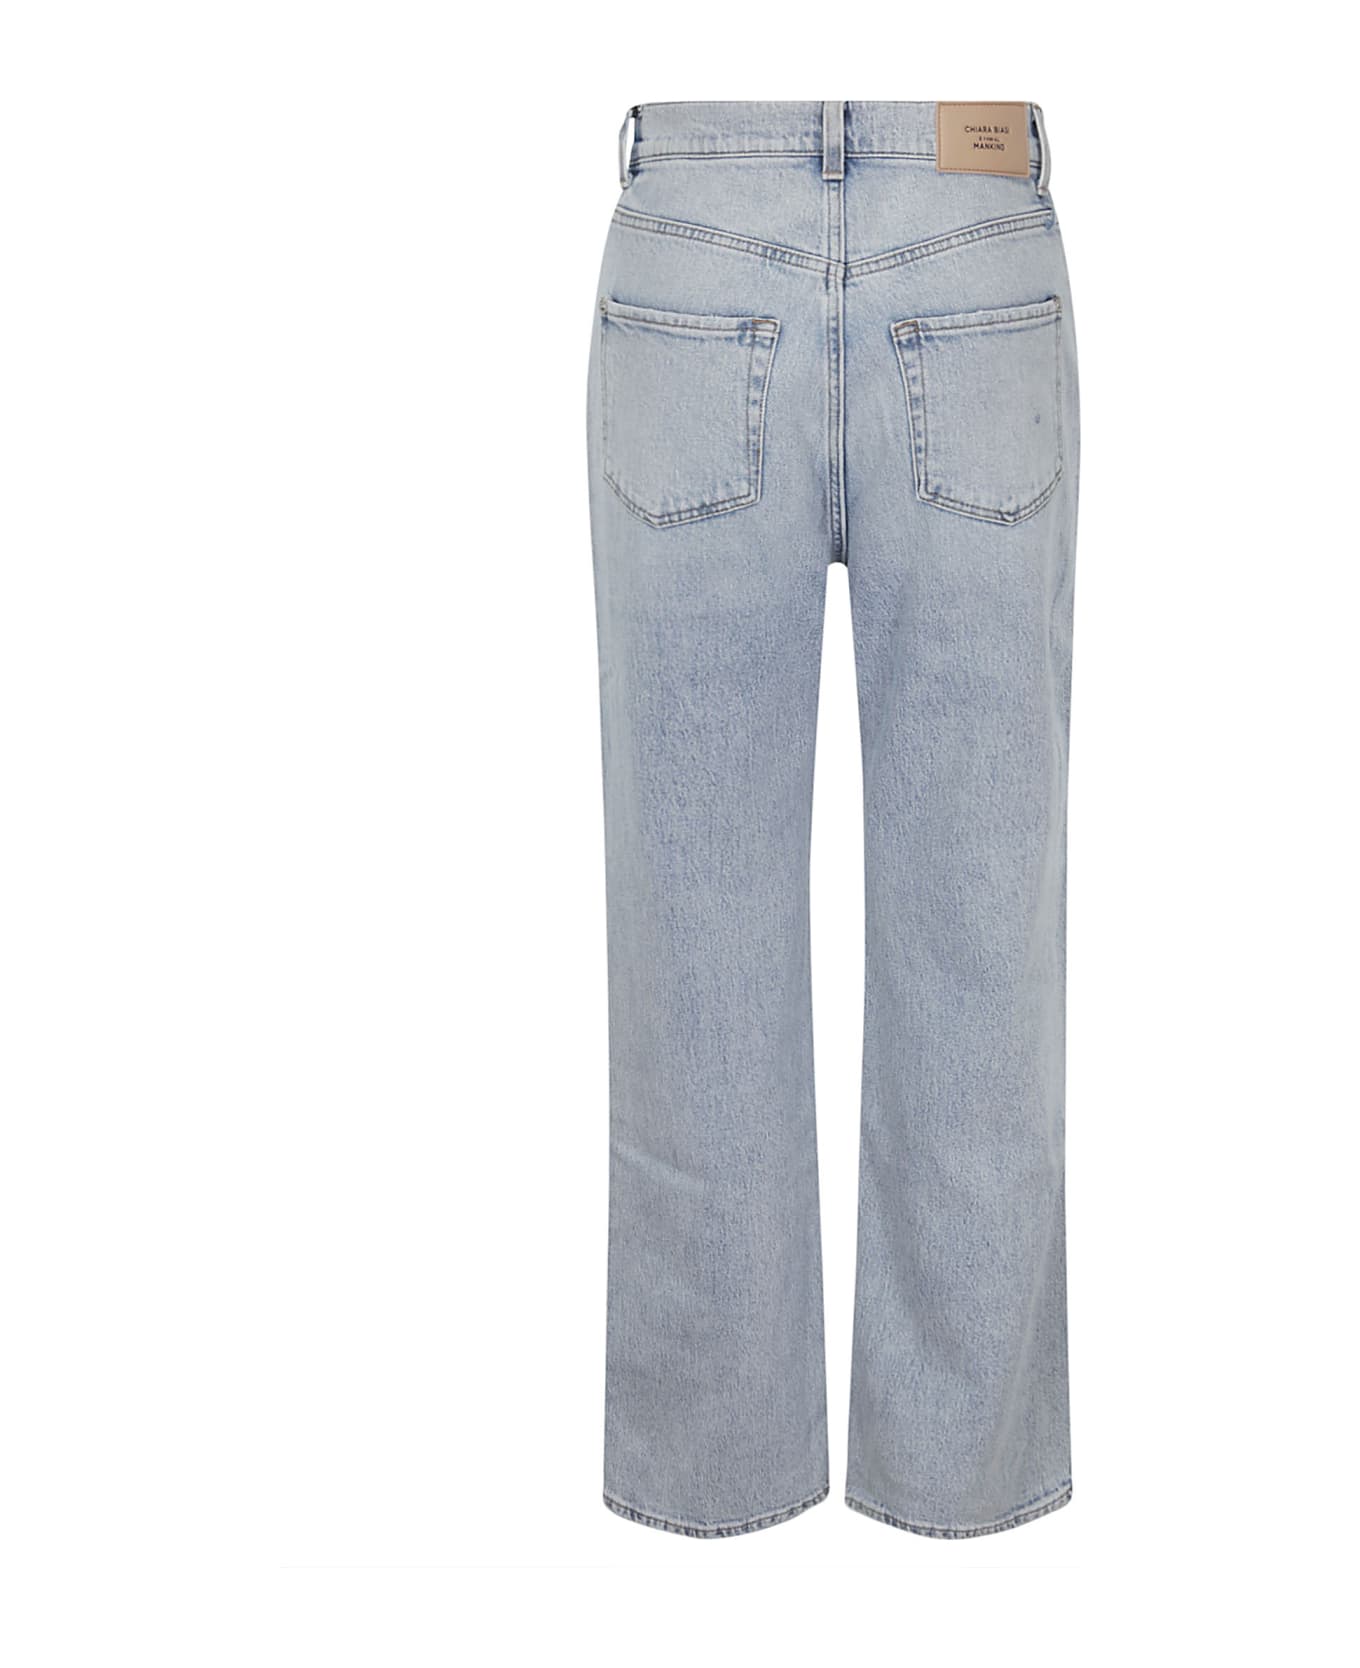 7 For All Mankind Relaxed Trouser Arctic - LIGHT BLUE